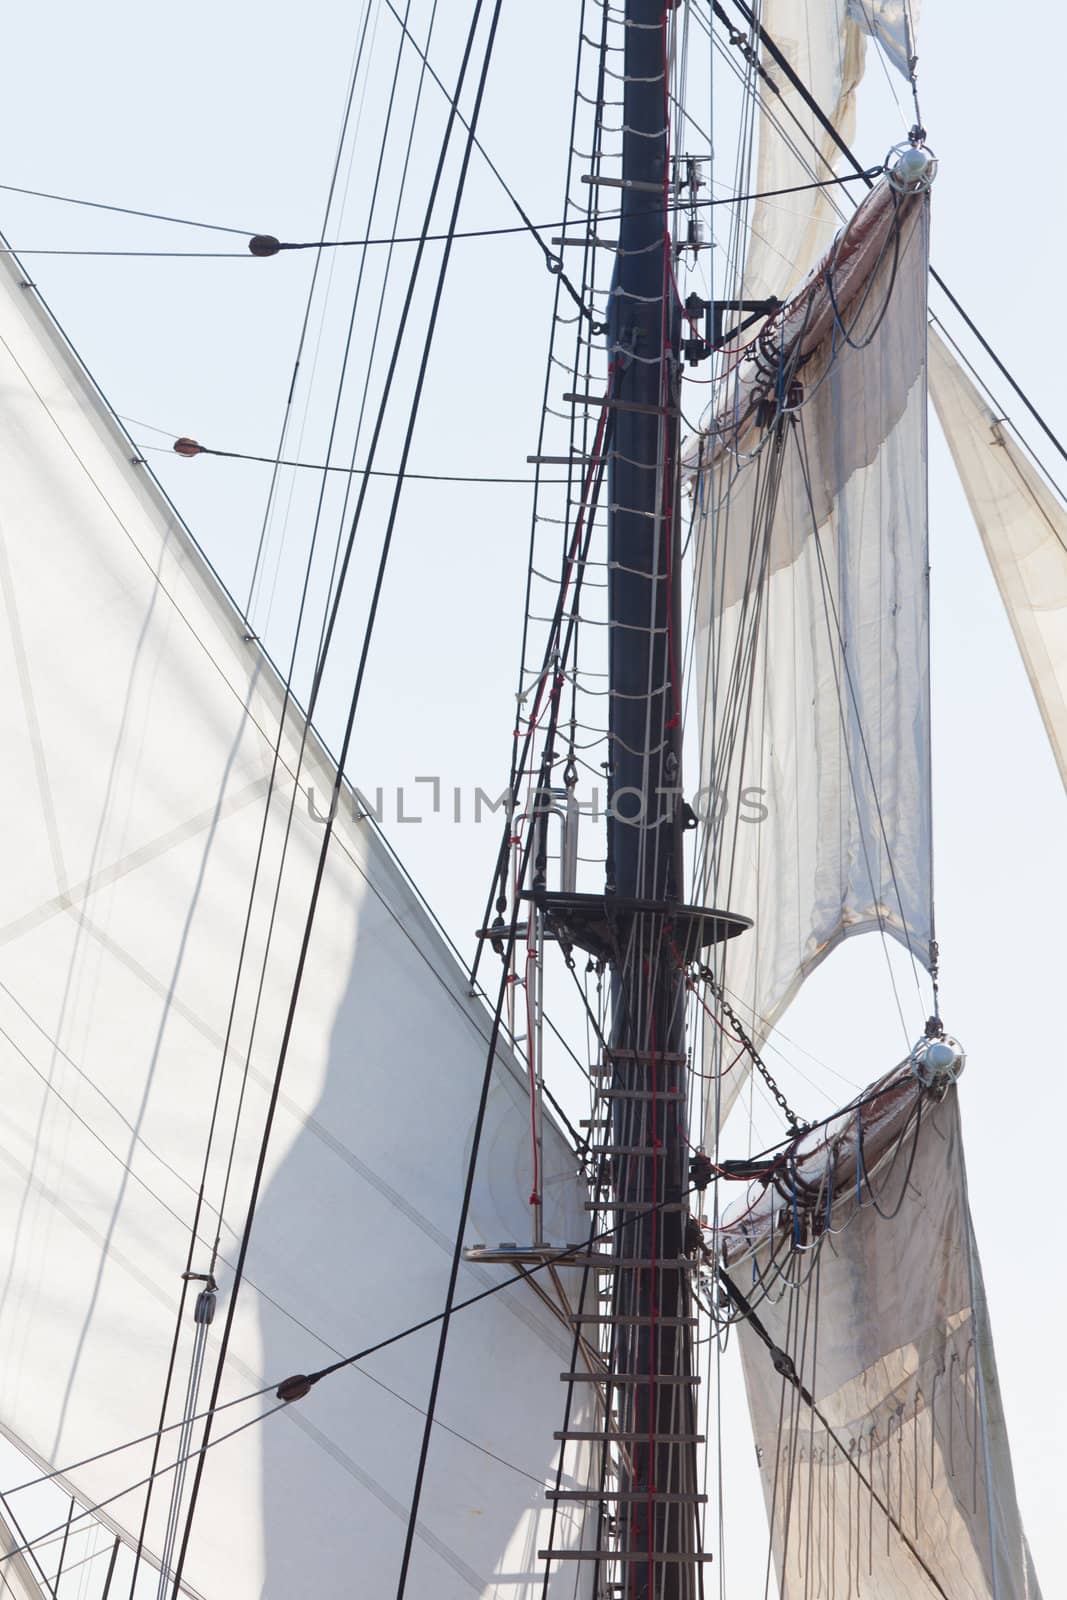 Barquentine yacht sails and rigging background by PiLens